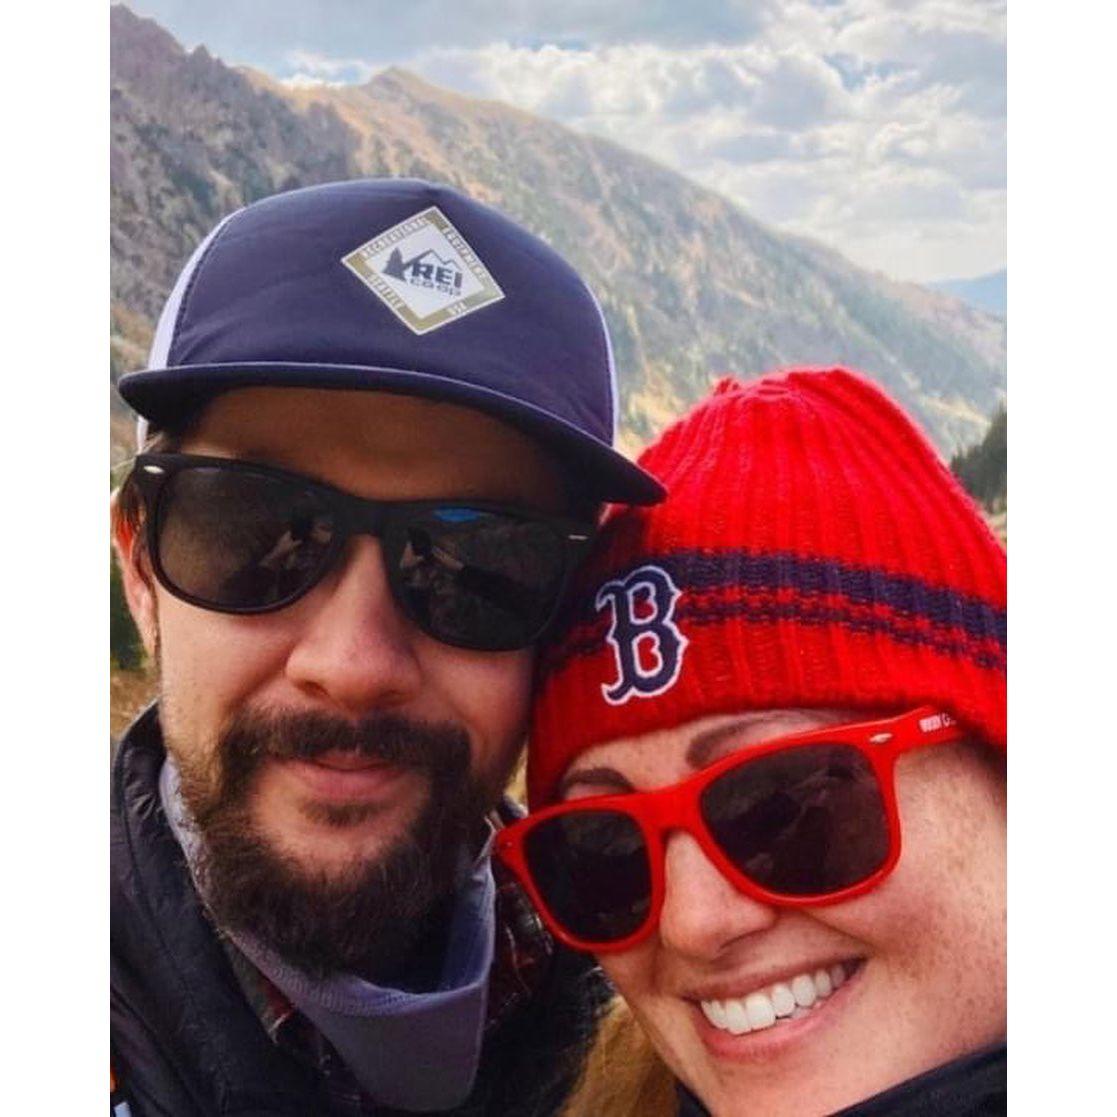 During one of their bigger hikes out in Vail, CO. 2020